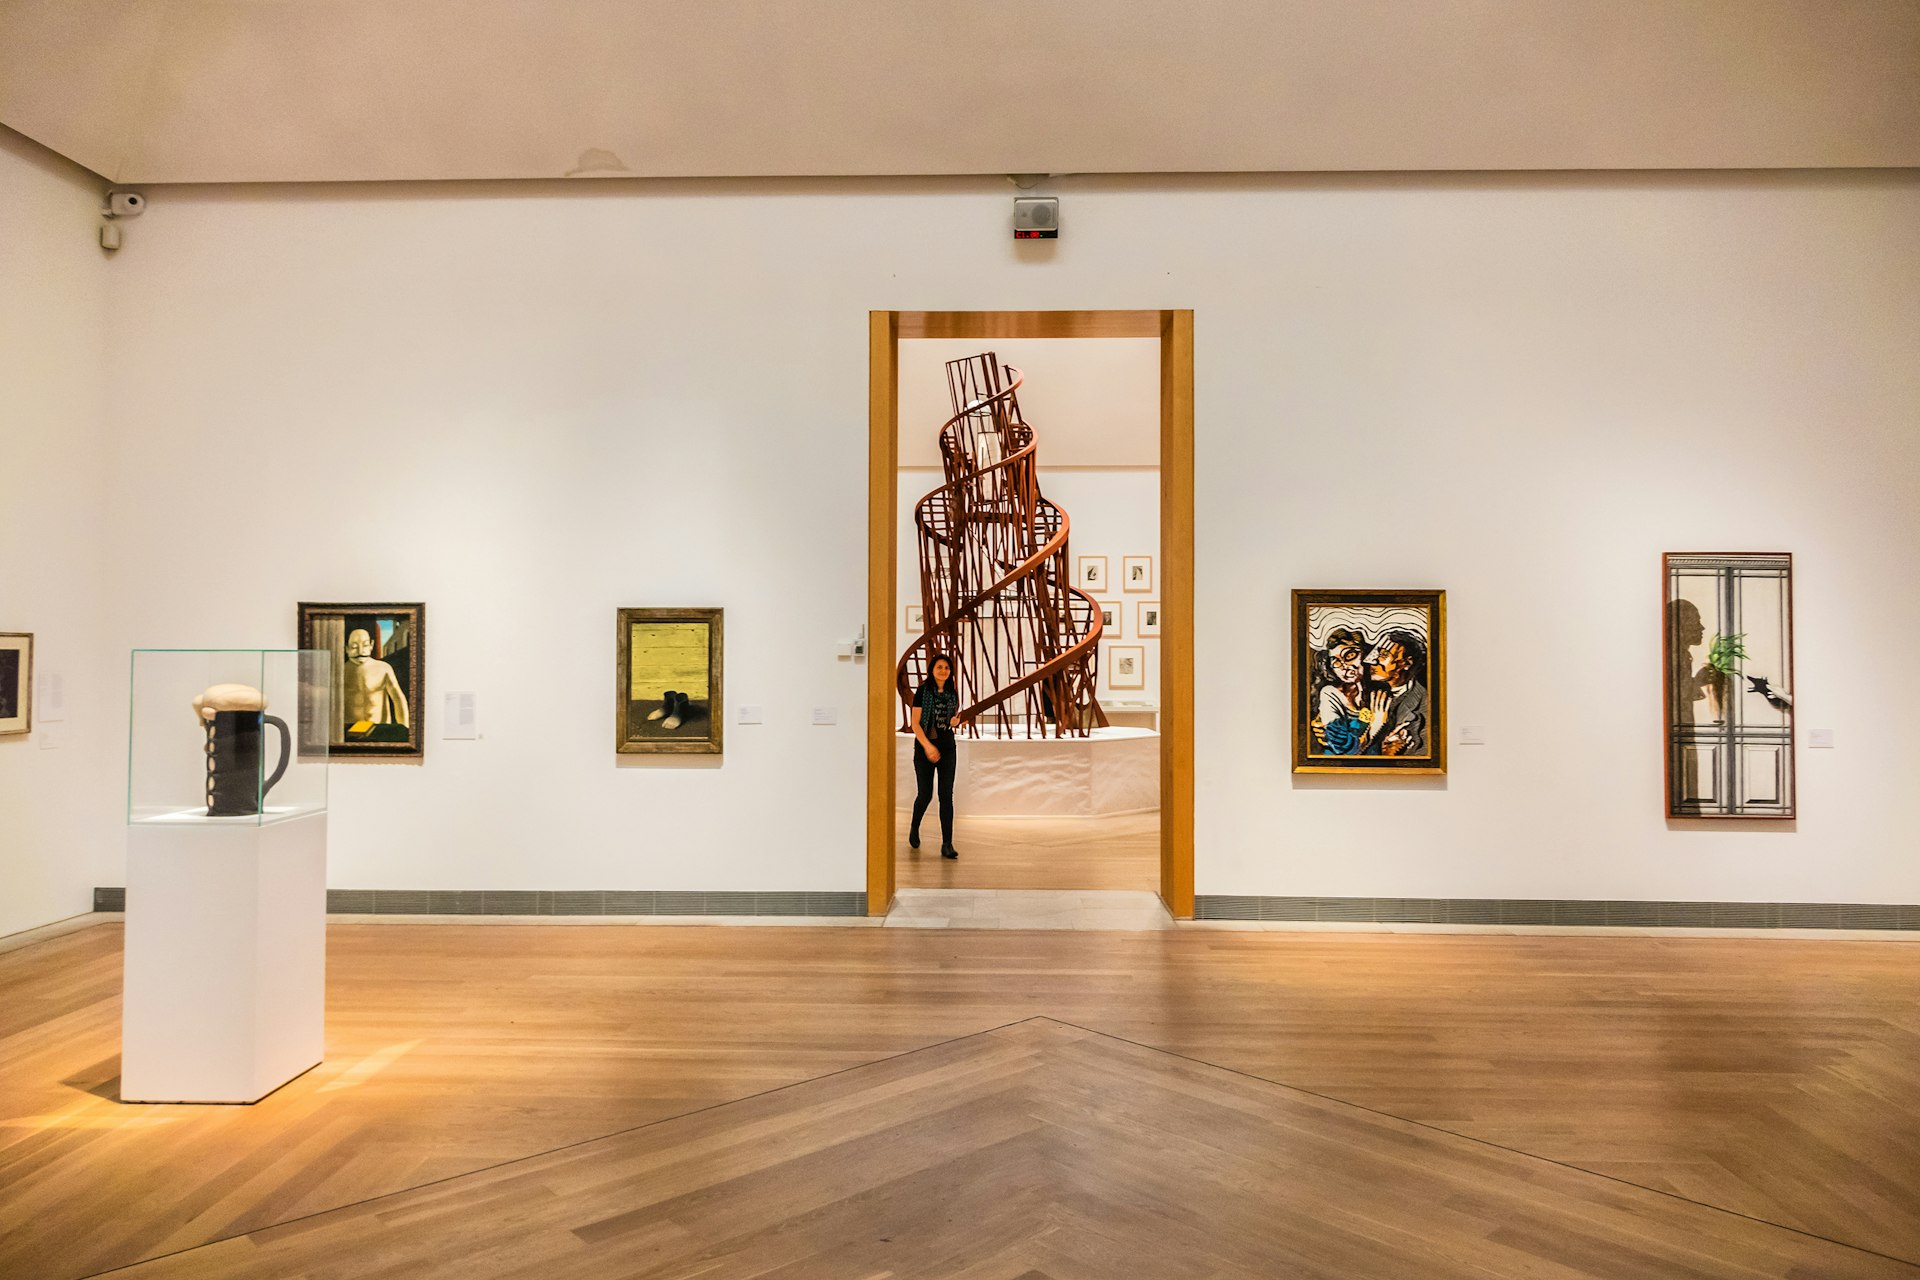 A gallery space with various pieces of modern art on the walls and a central spiral sculpture viewed through a doorway